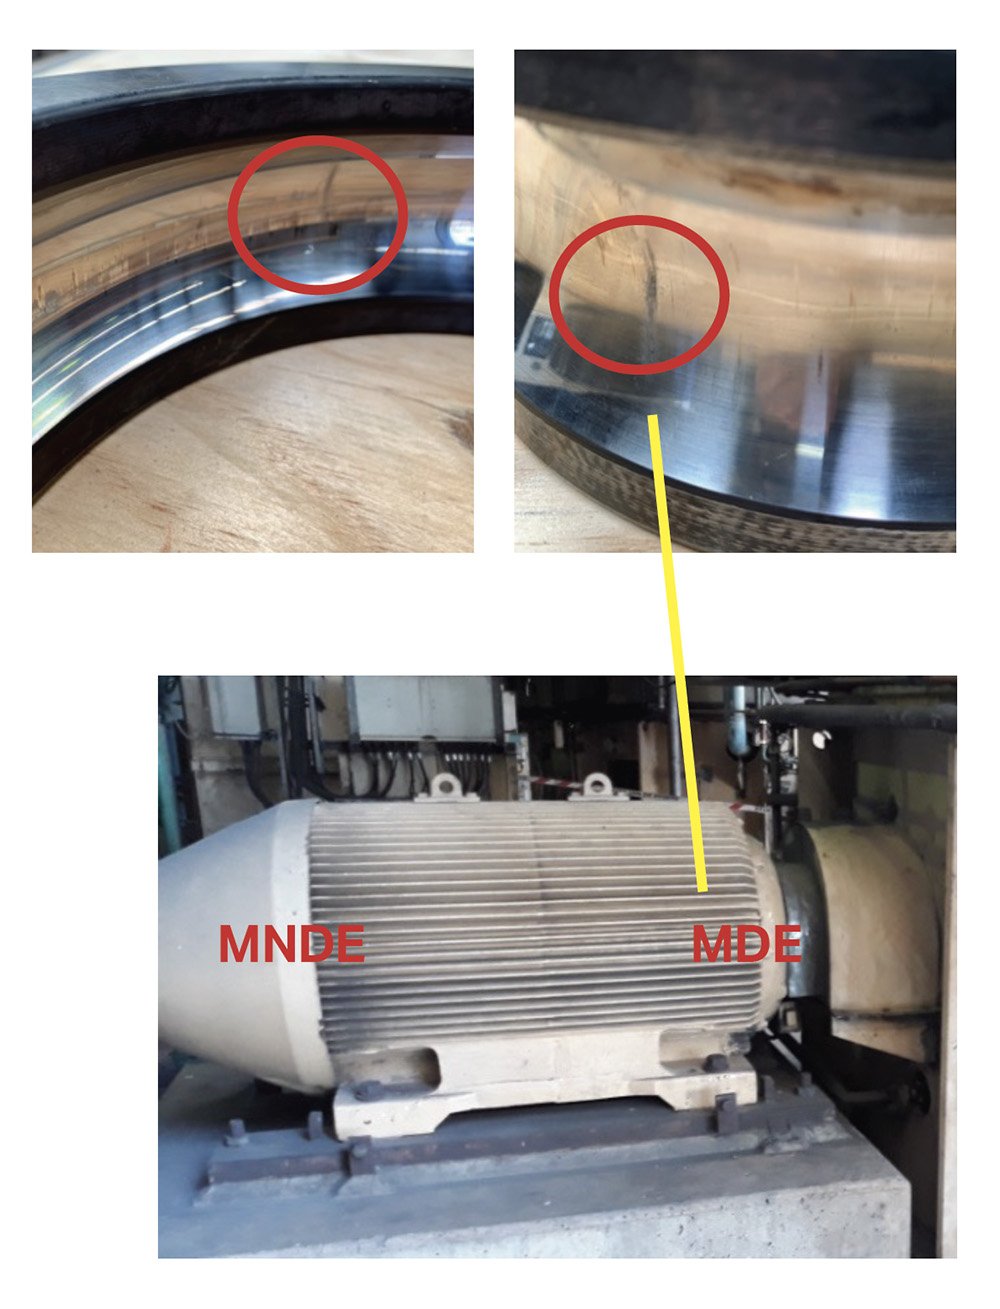 photographs showing the motor and close ups of the defect in the Inner Race Bearing